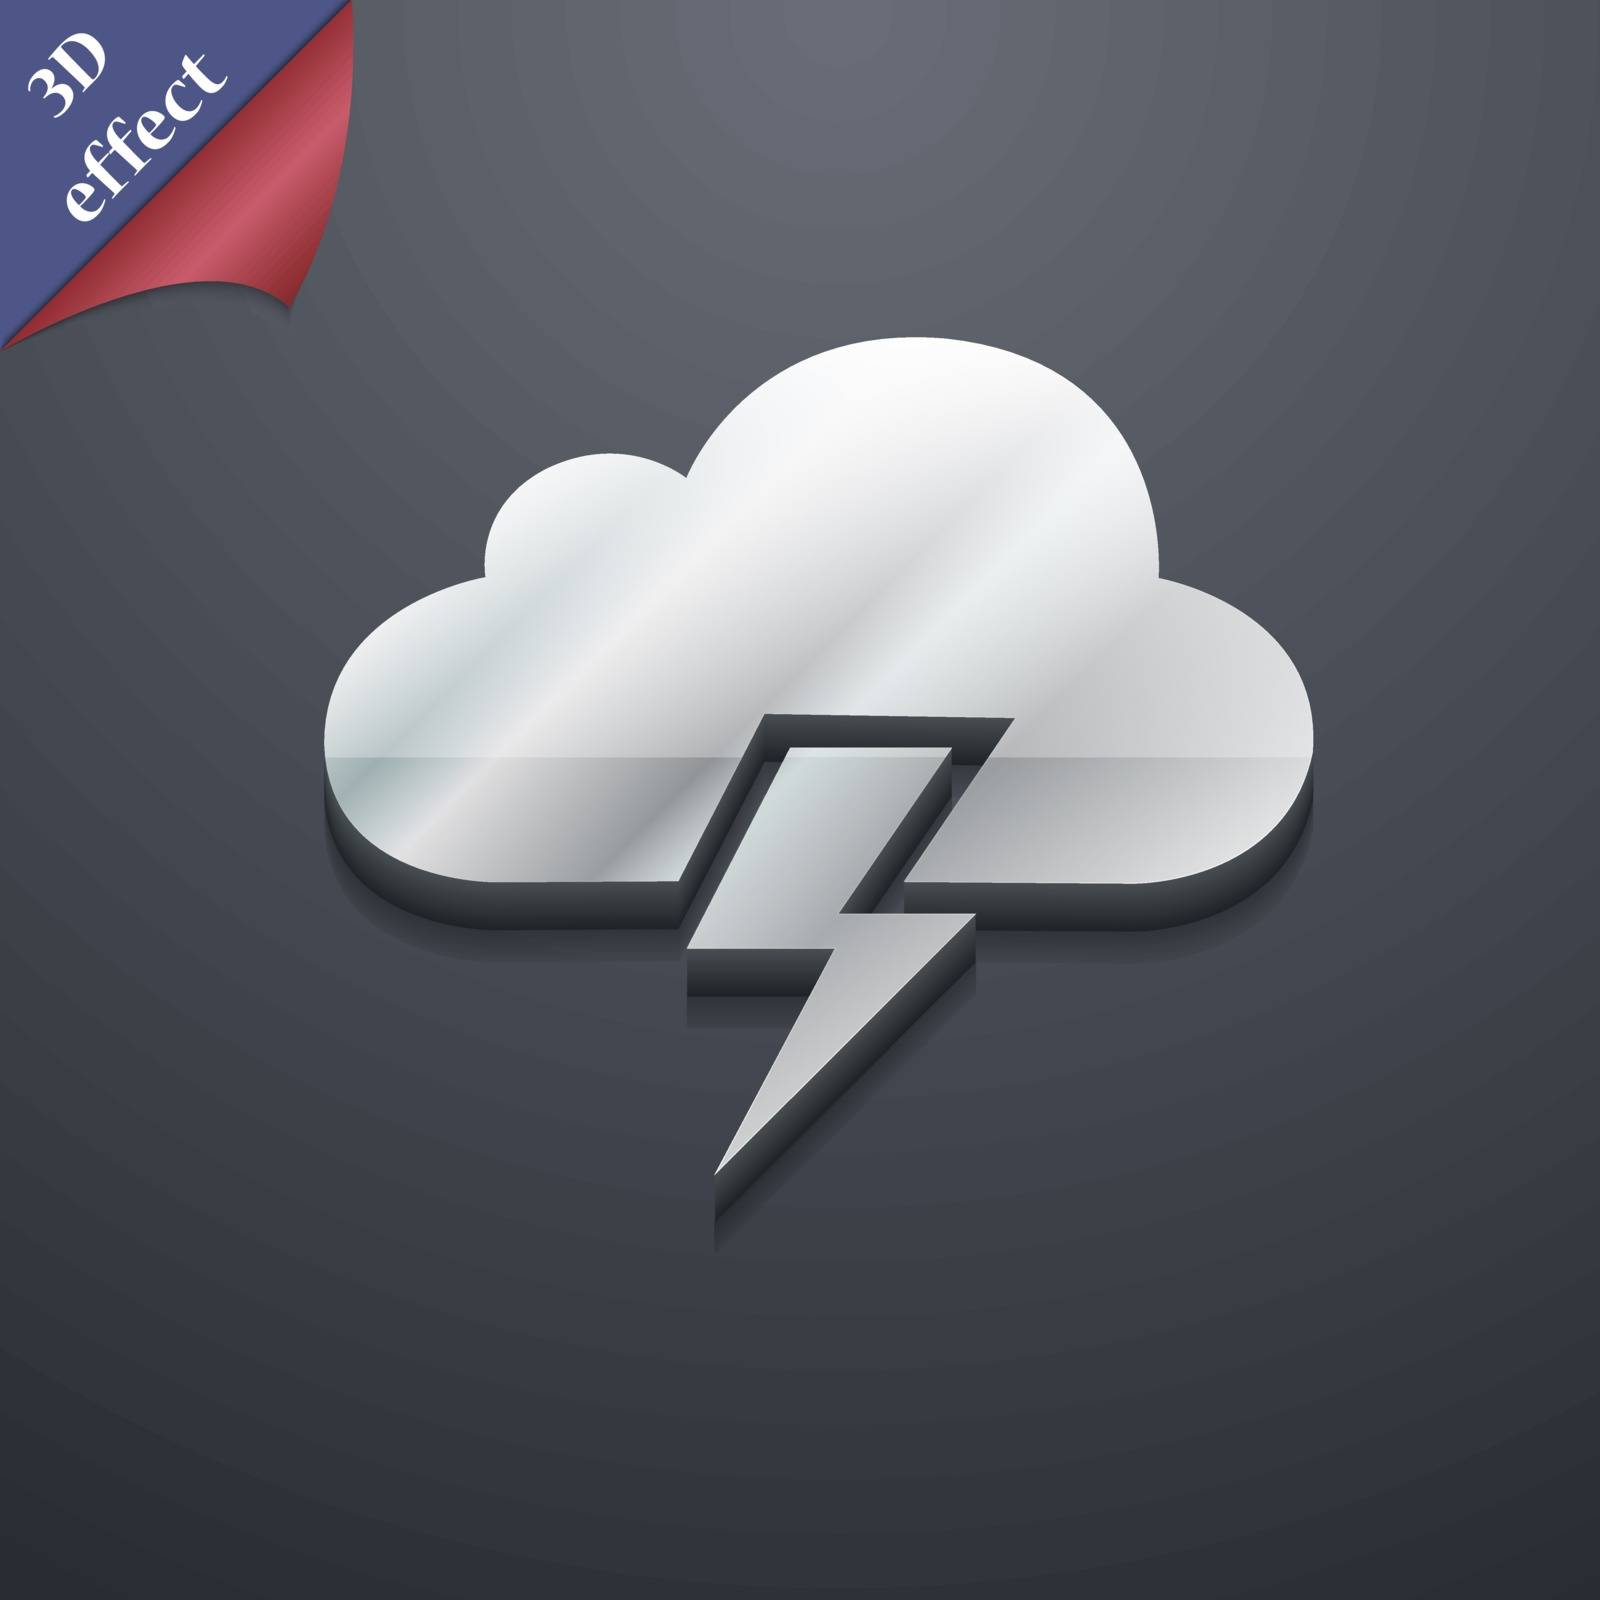 Heavy thunderstorm icon symbol. 3D style. Trendy, modern design with space for your text Vector illustration